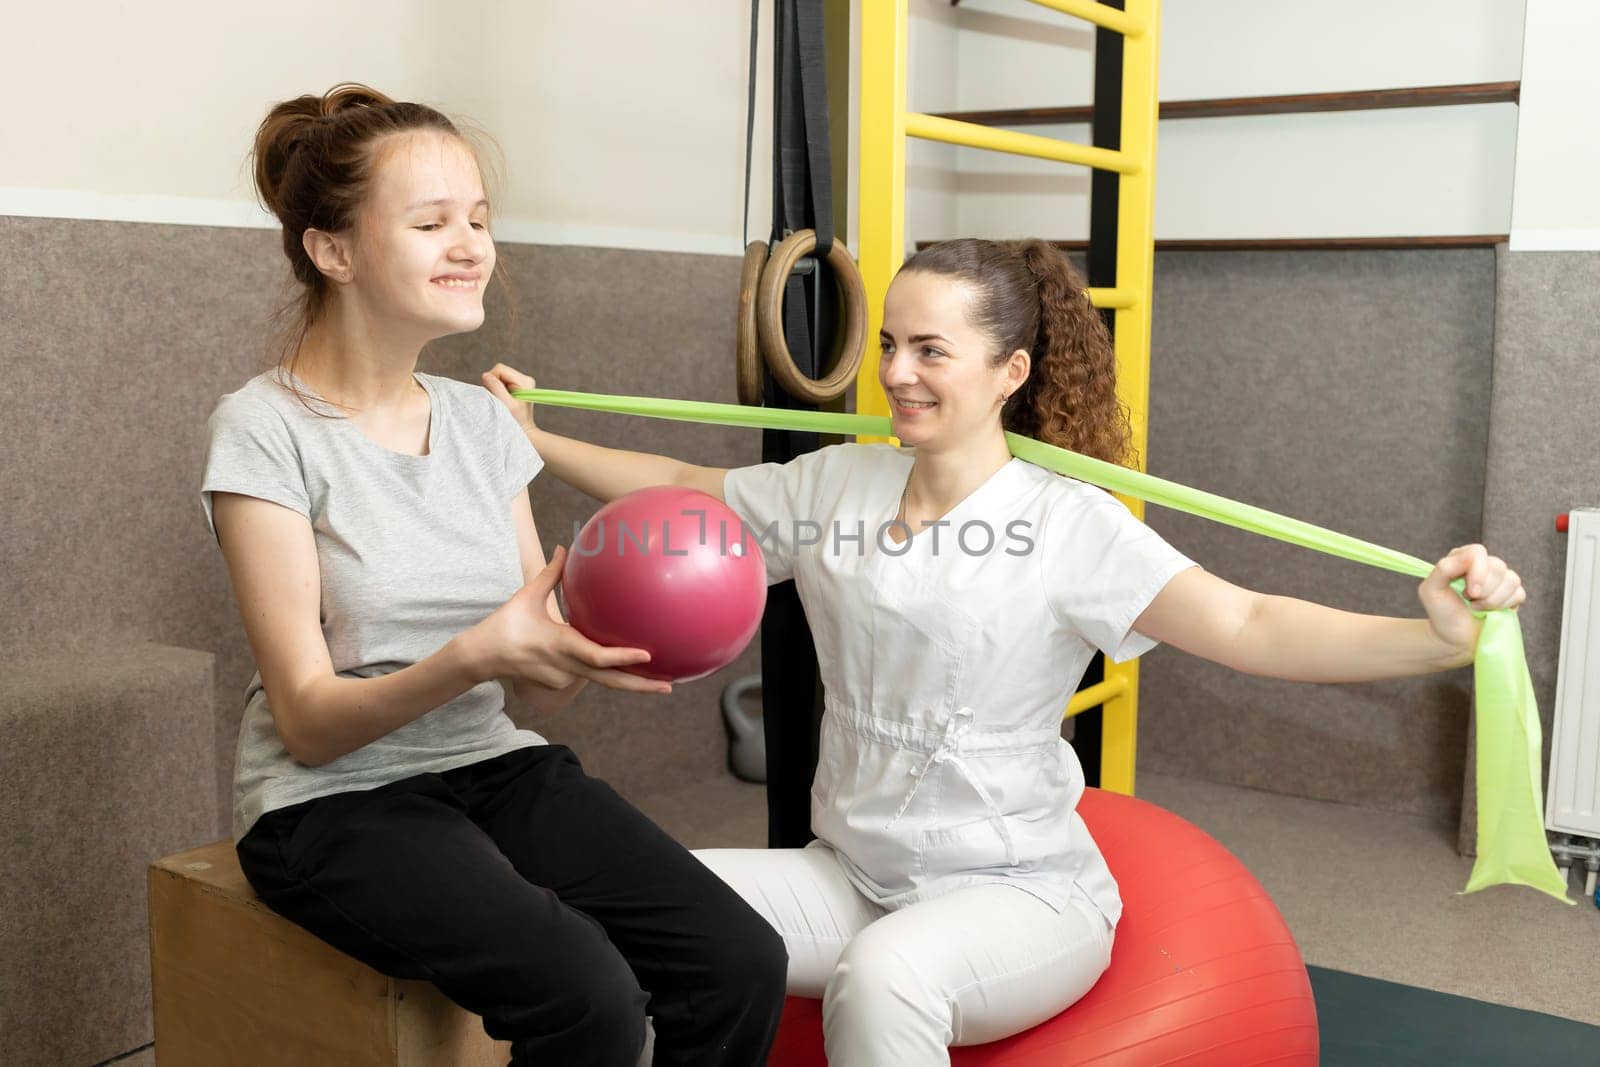 Smiling Child, Teenage Girl With Disability Does Physical Exercises With Support Of Rehabilitation Specialist, Physical Therapist. Rehabilitation. Musculoskeletal Disorder. Horizontal plane.